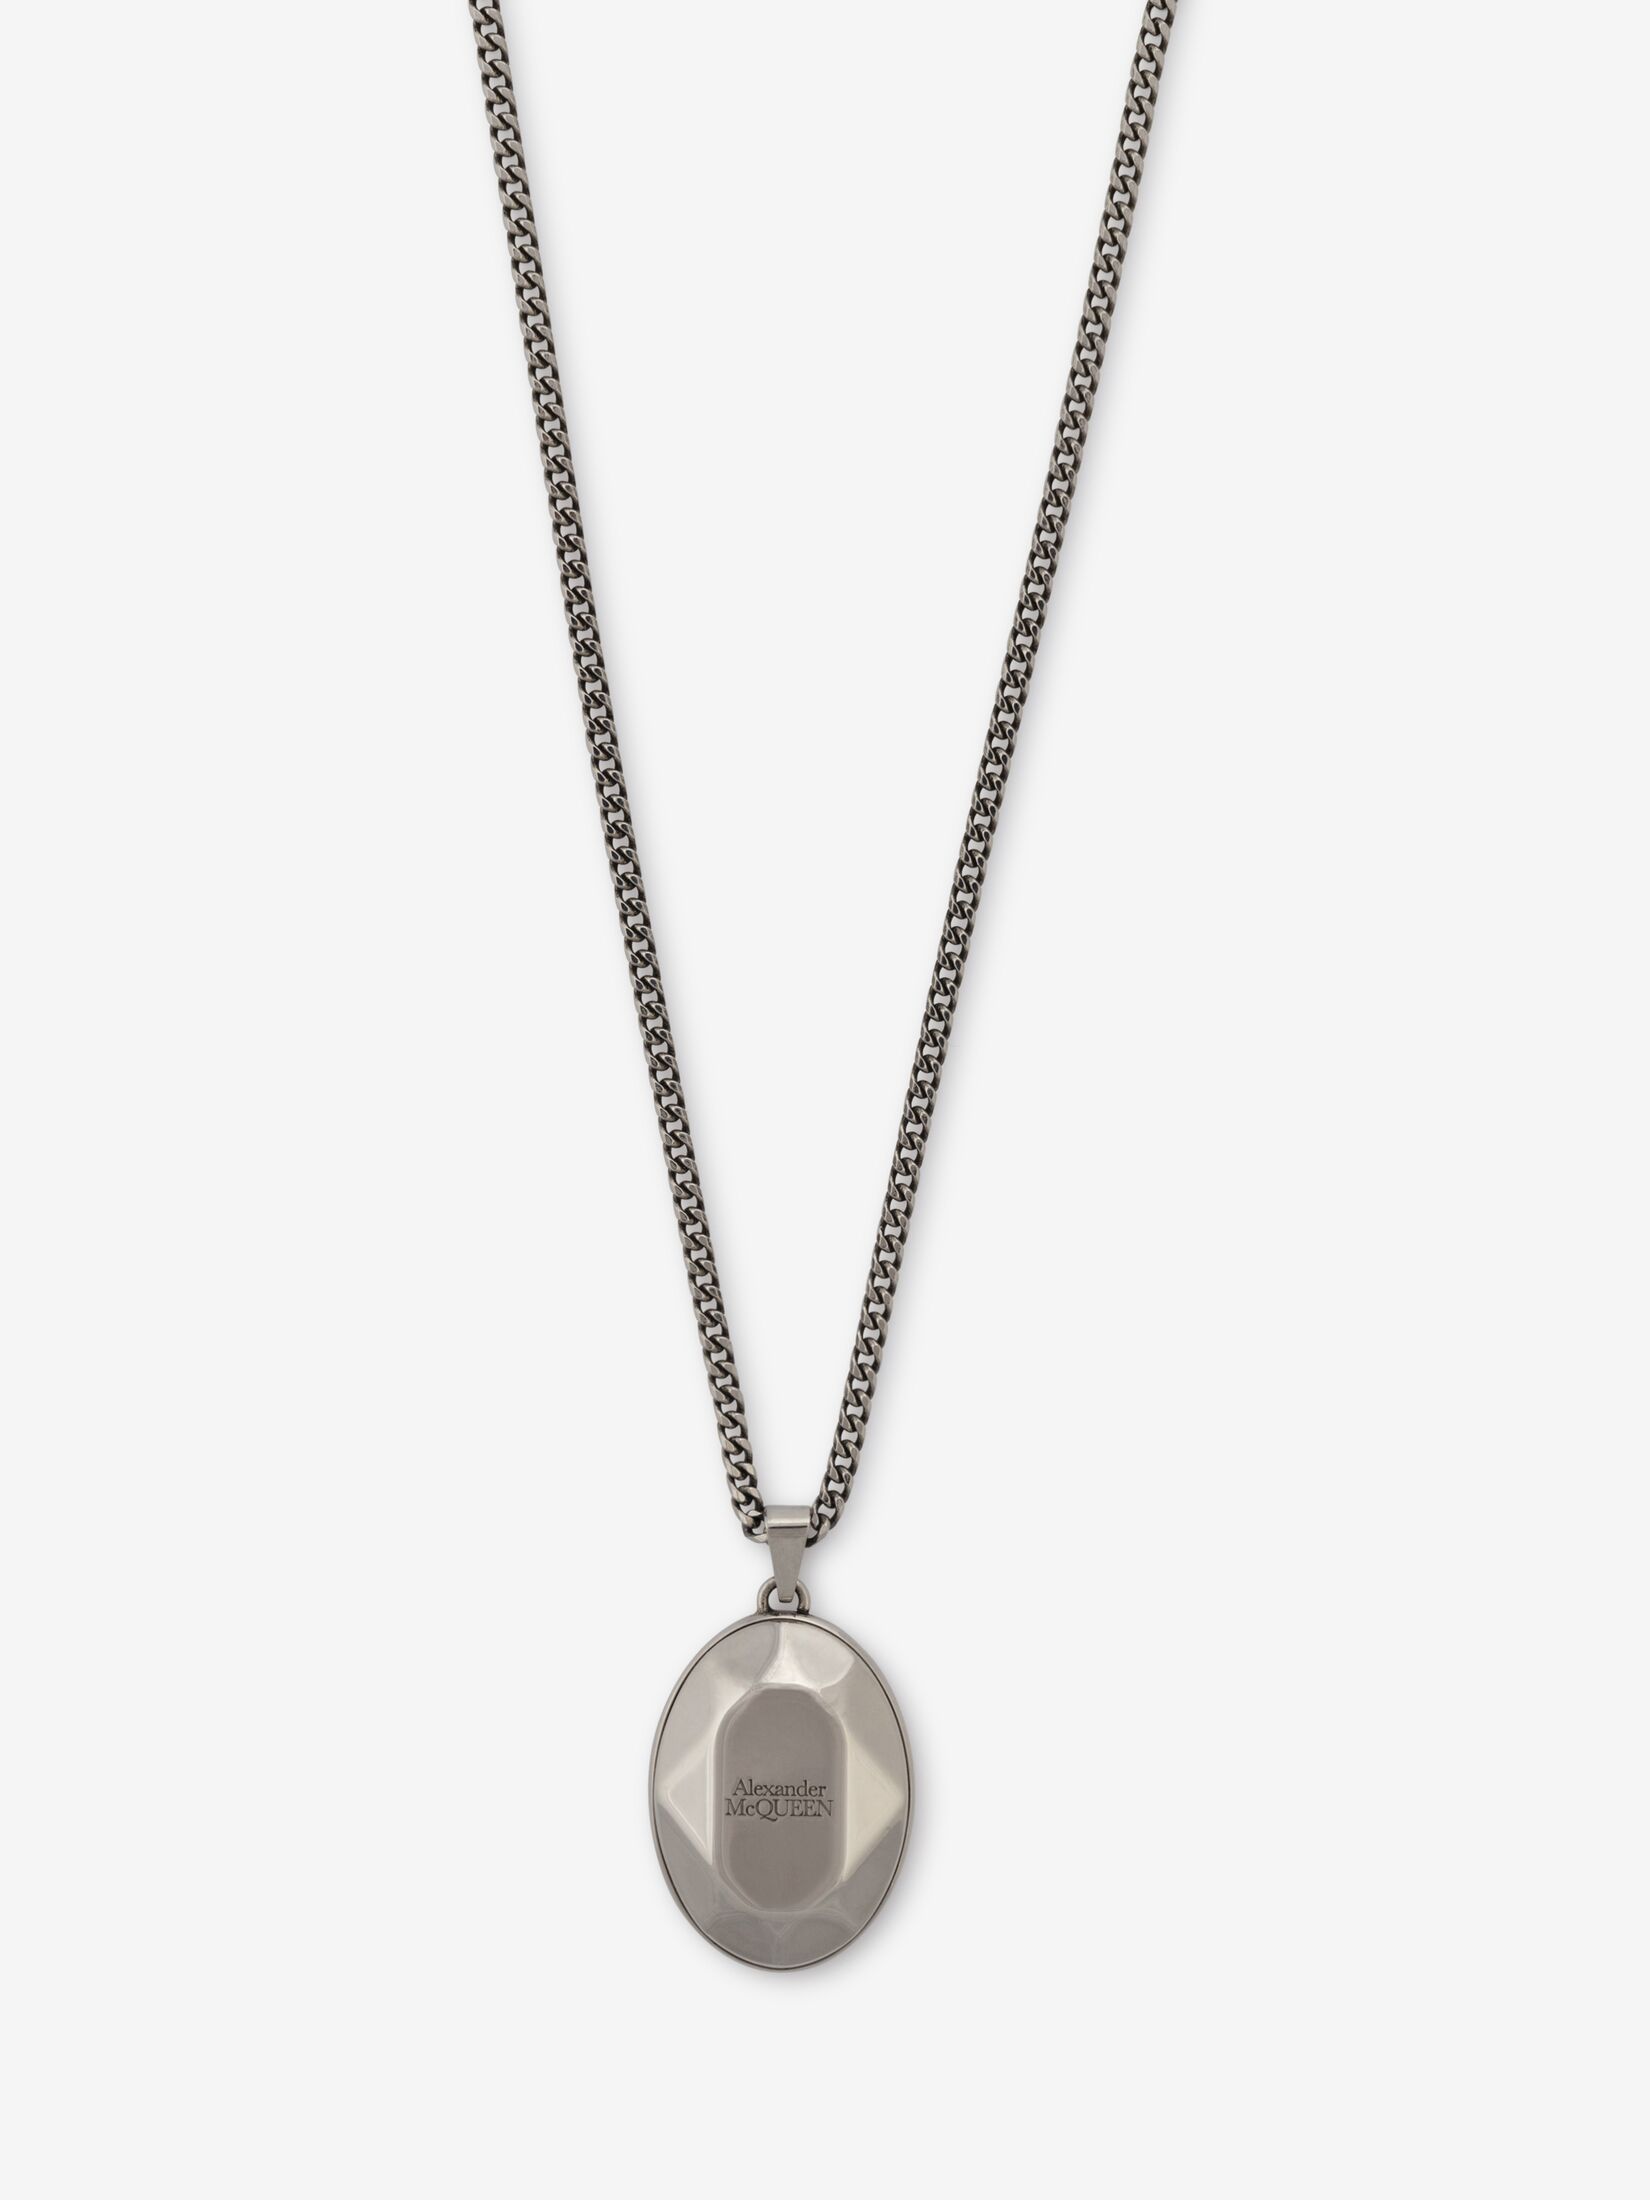 The Faceted Stone Necklace